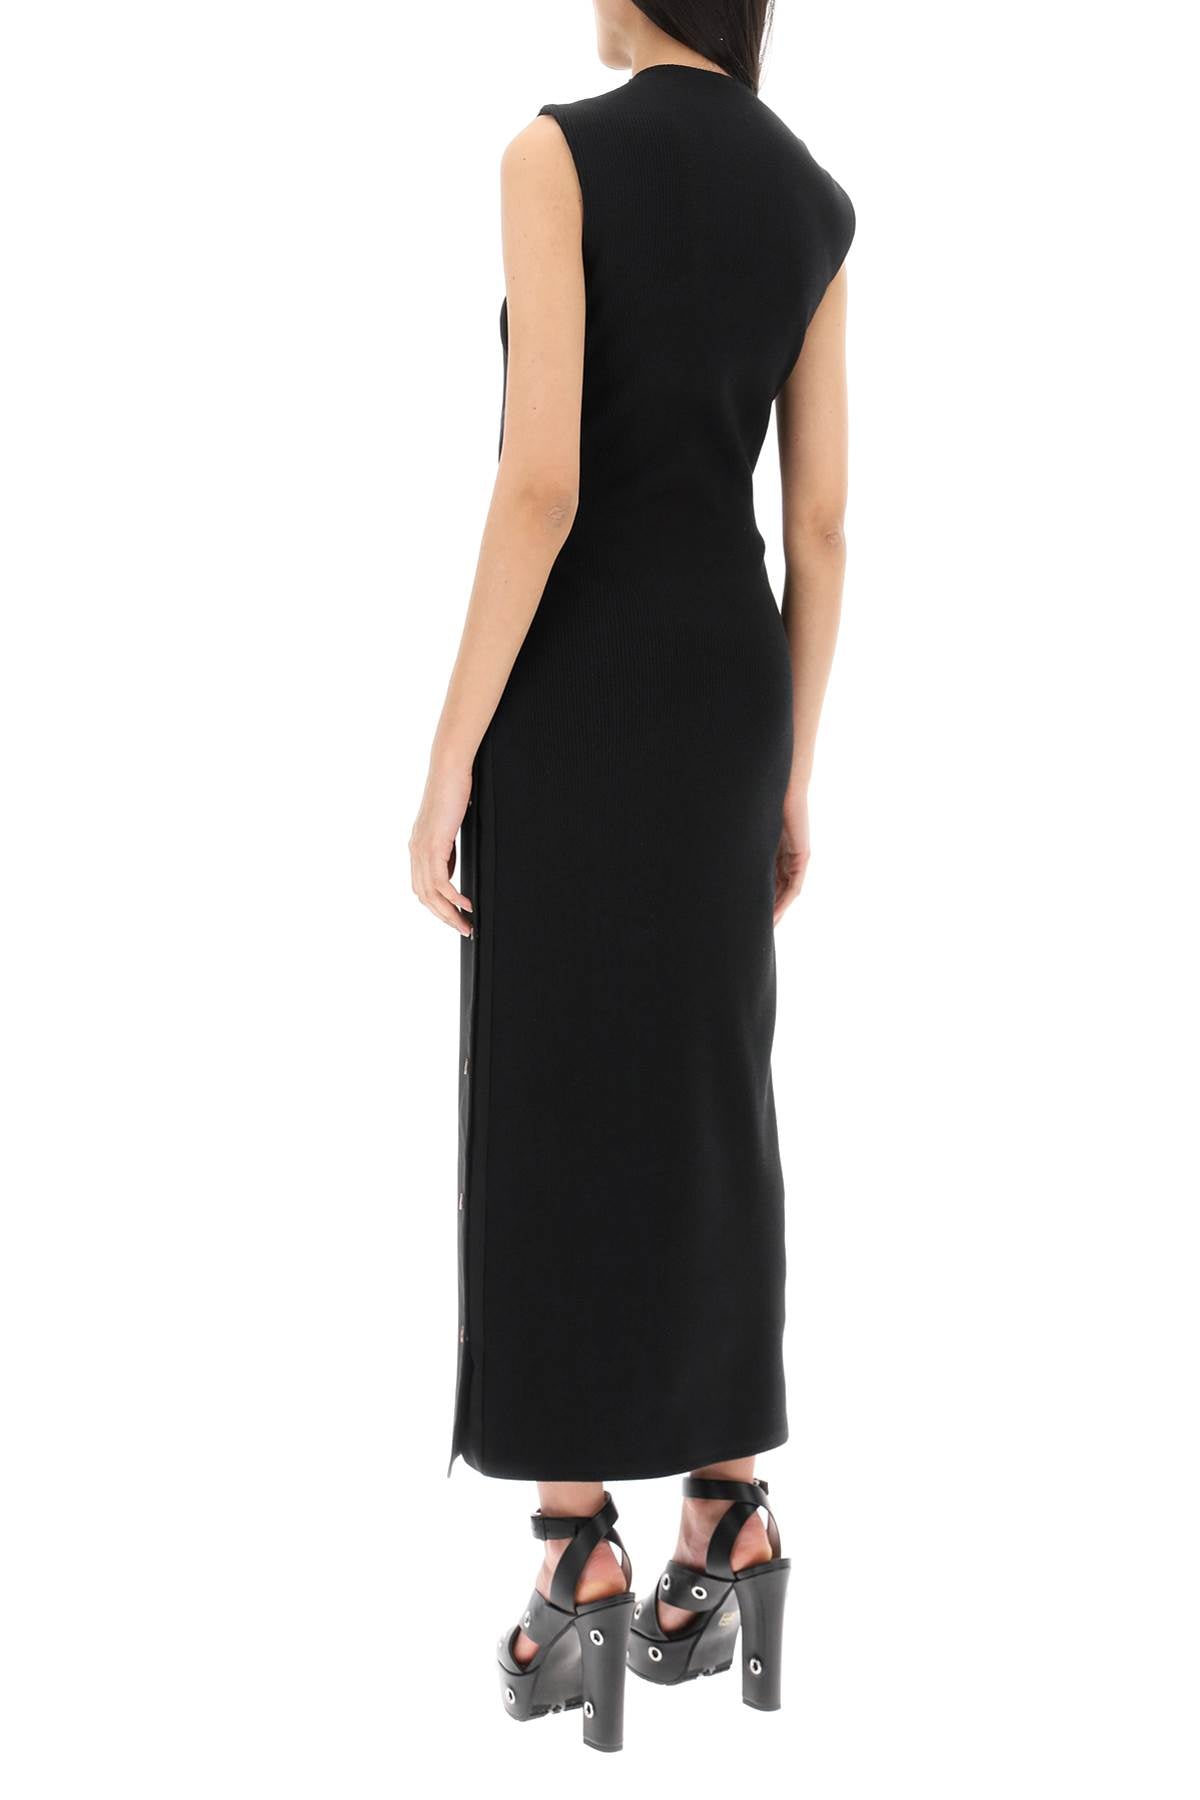 Y/PROJECT Versatile Sleeveless Maxi Dress for Women in Tonal Black Wool with Detachable Panels